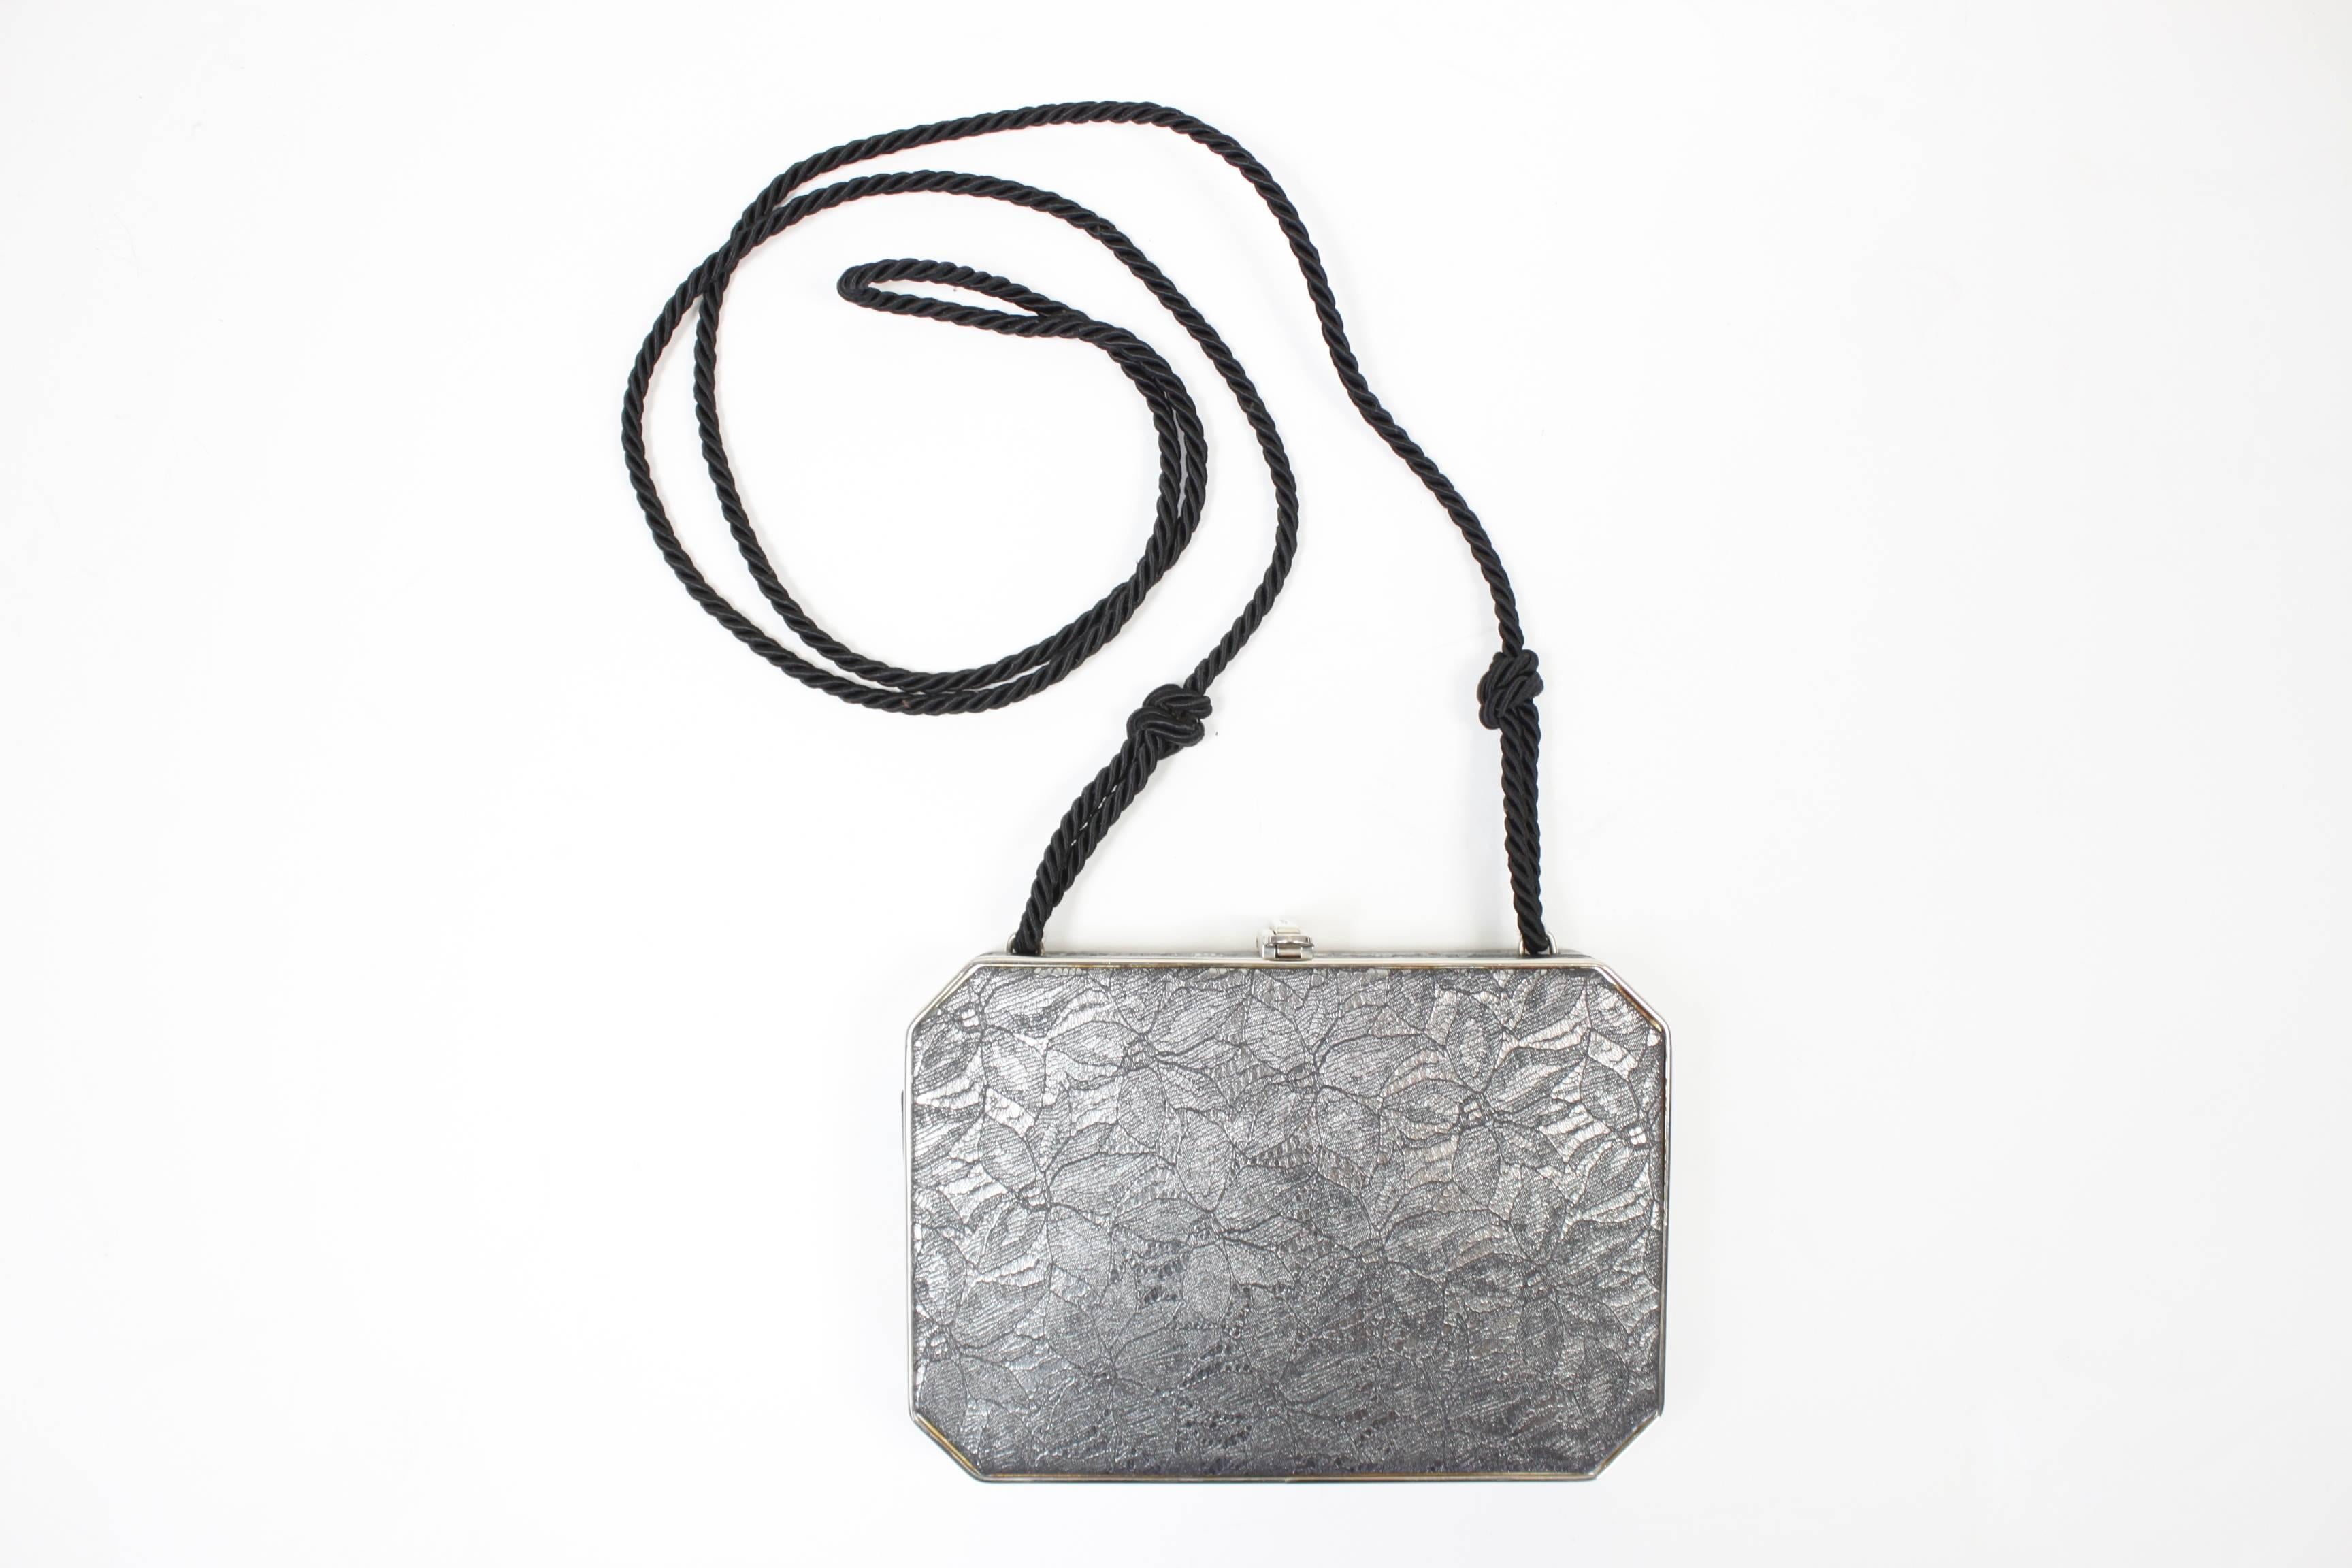 Fendi Silver and Black Lace Evening Clutch with Iridescent Sheen 1